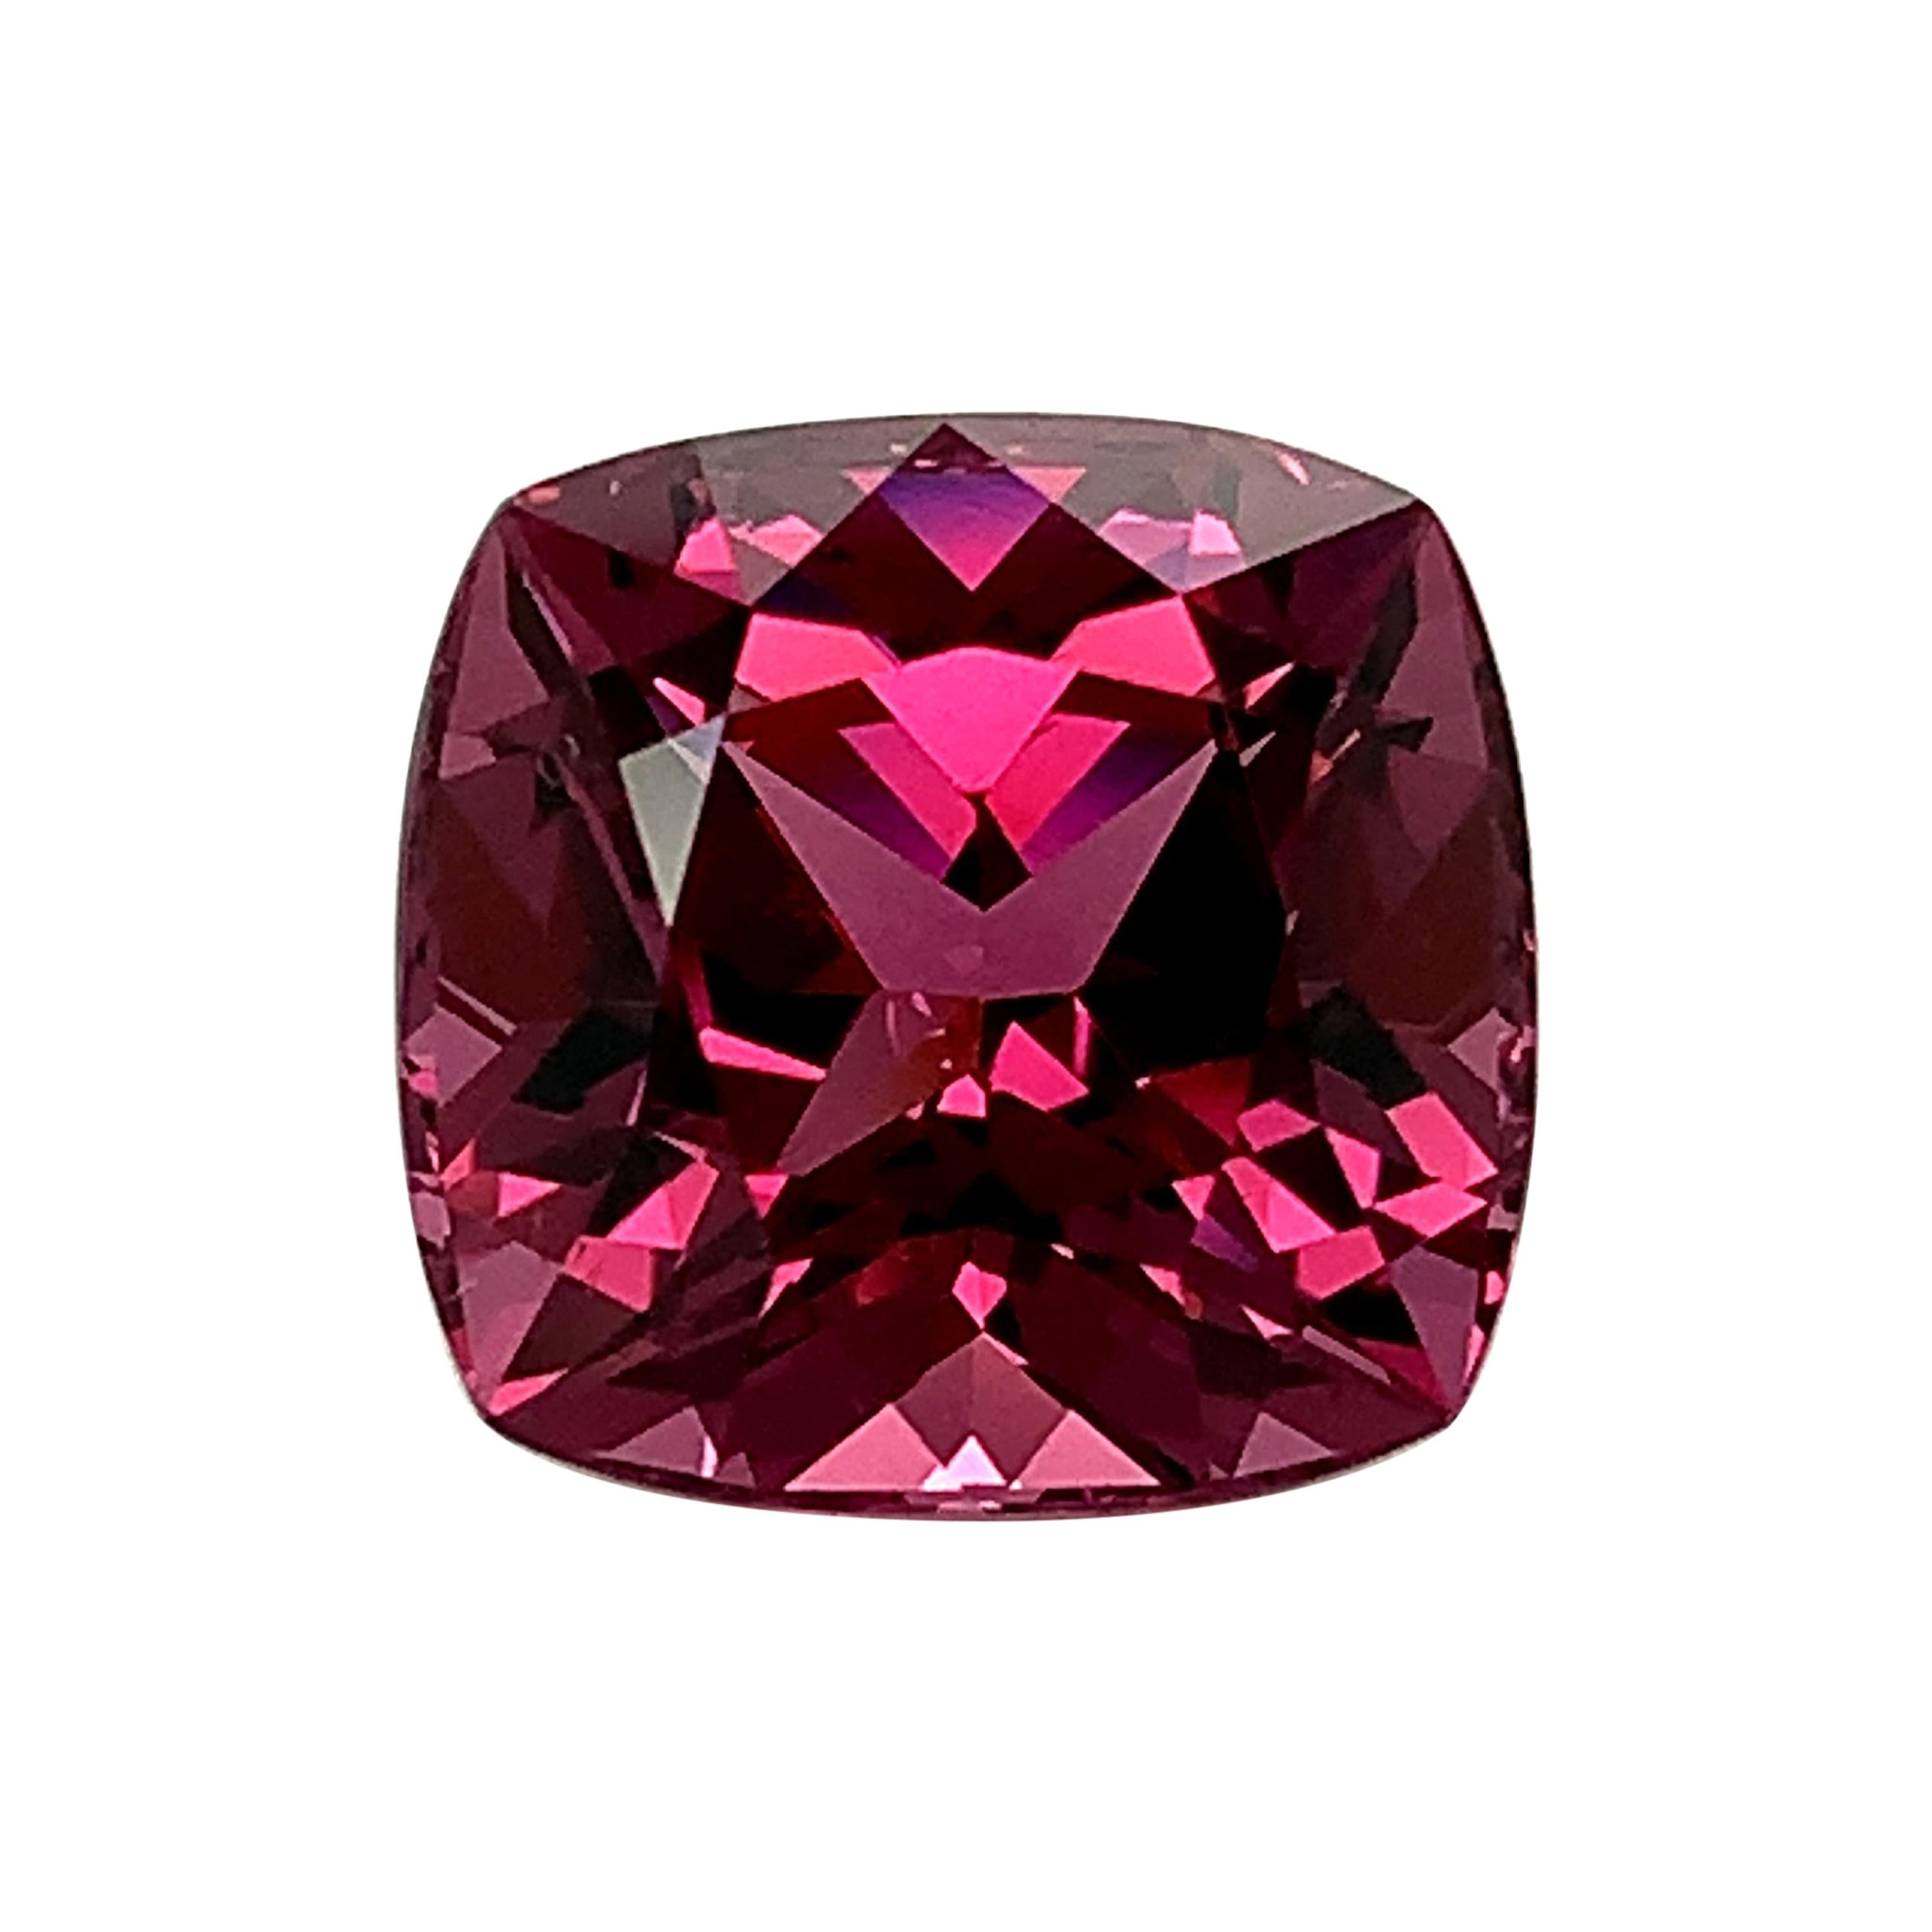 Unheated 9.26 Carat Purple Pink Spinel Cushion, Loose Gemstone, GIA Certified .A For Sale